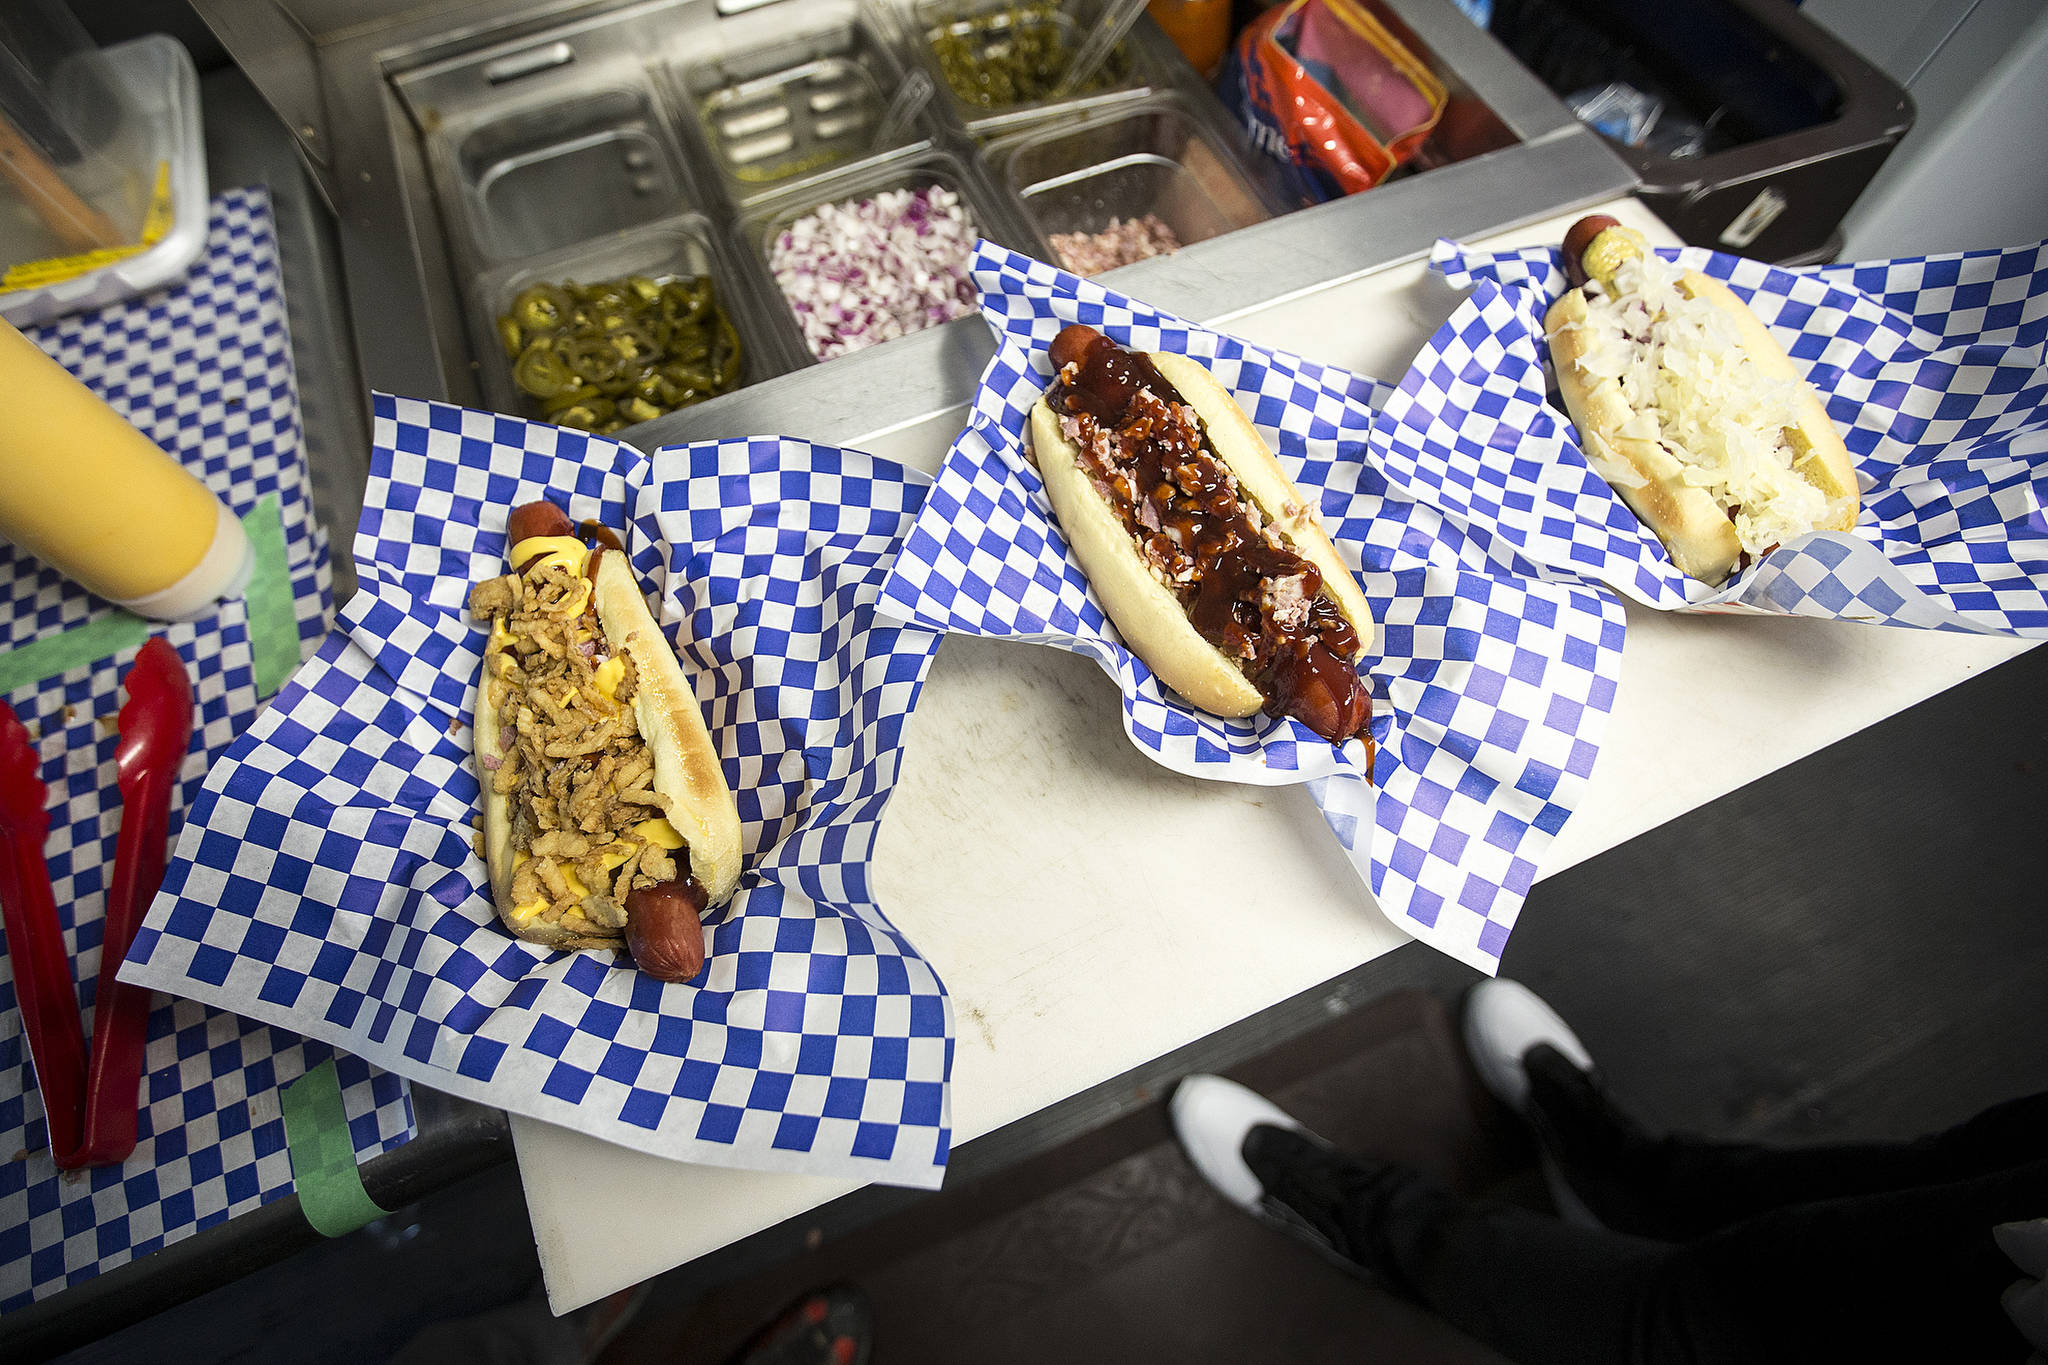 Hot dogs from Big Dog’s food truck — (from left) the Wilson, the LOB and the Petey — all have Seahawks inspired names. (Ian Terry / The Herald)